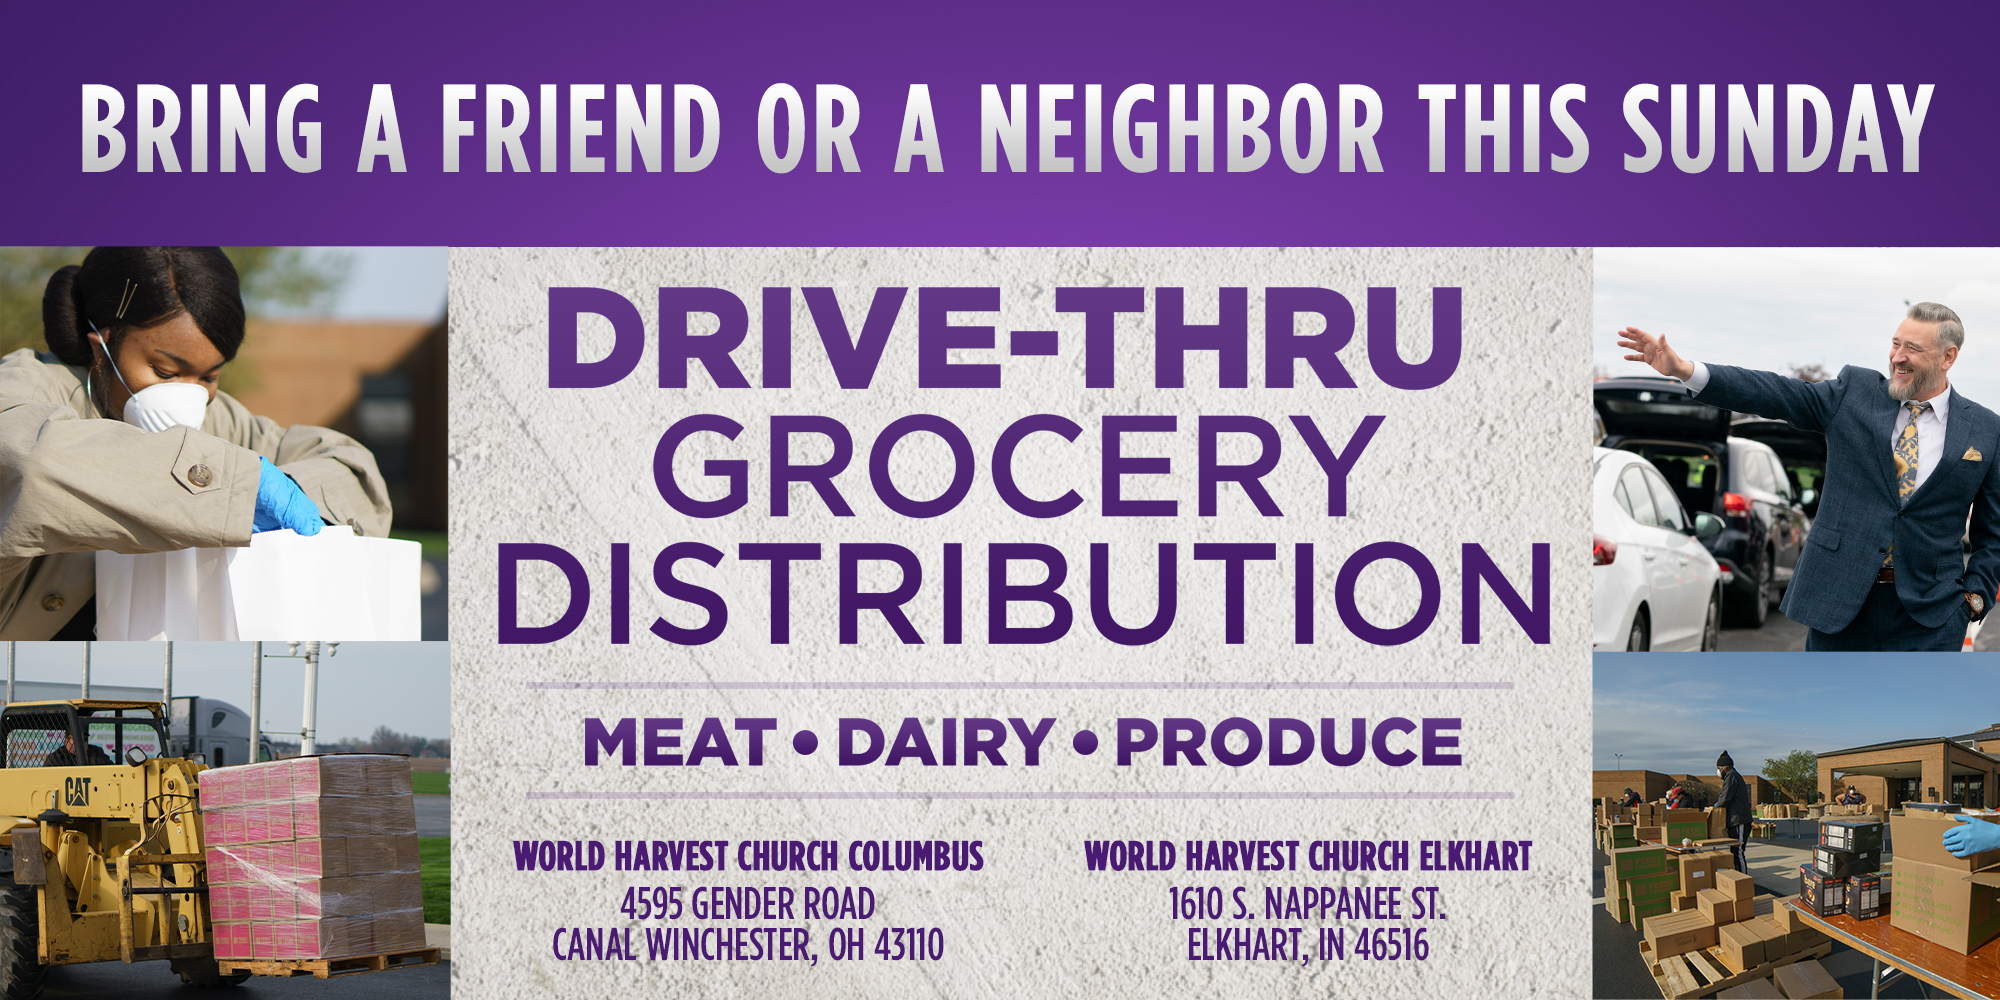 Bring a friend or a neighbor this sunday Drive-Thru Grocery Distribution Meat, Dairy, Produce. World Harvest Church 4595 Gender Road Canal Winchester, OH 43110